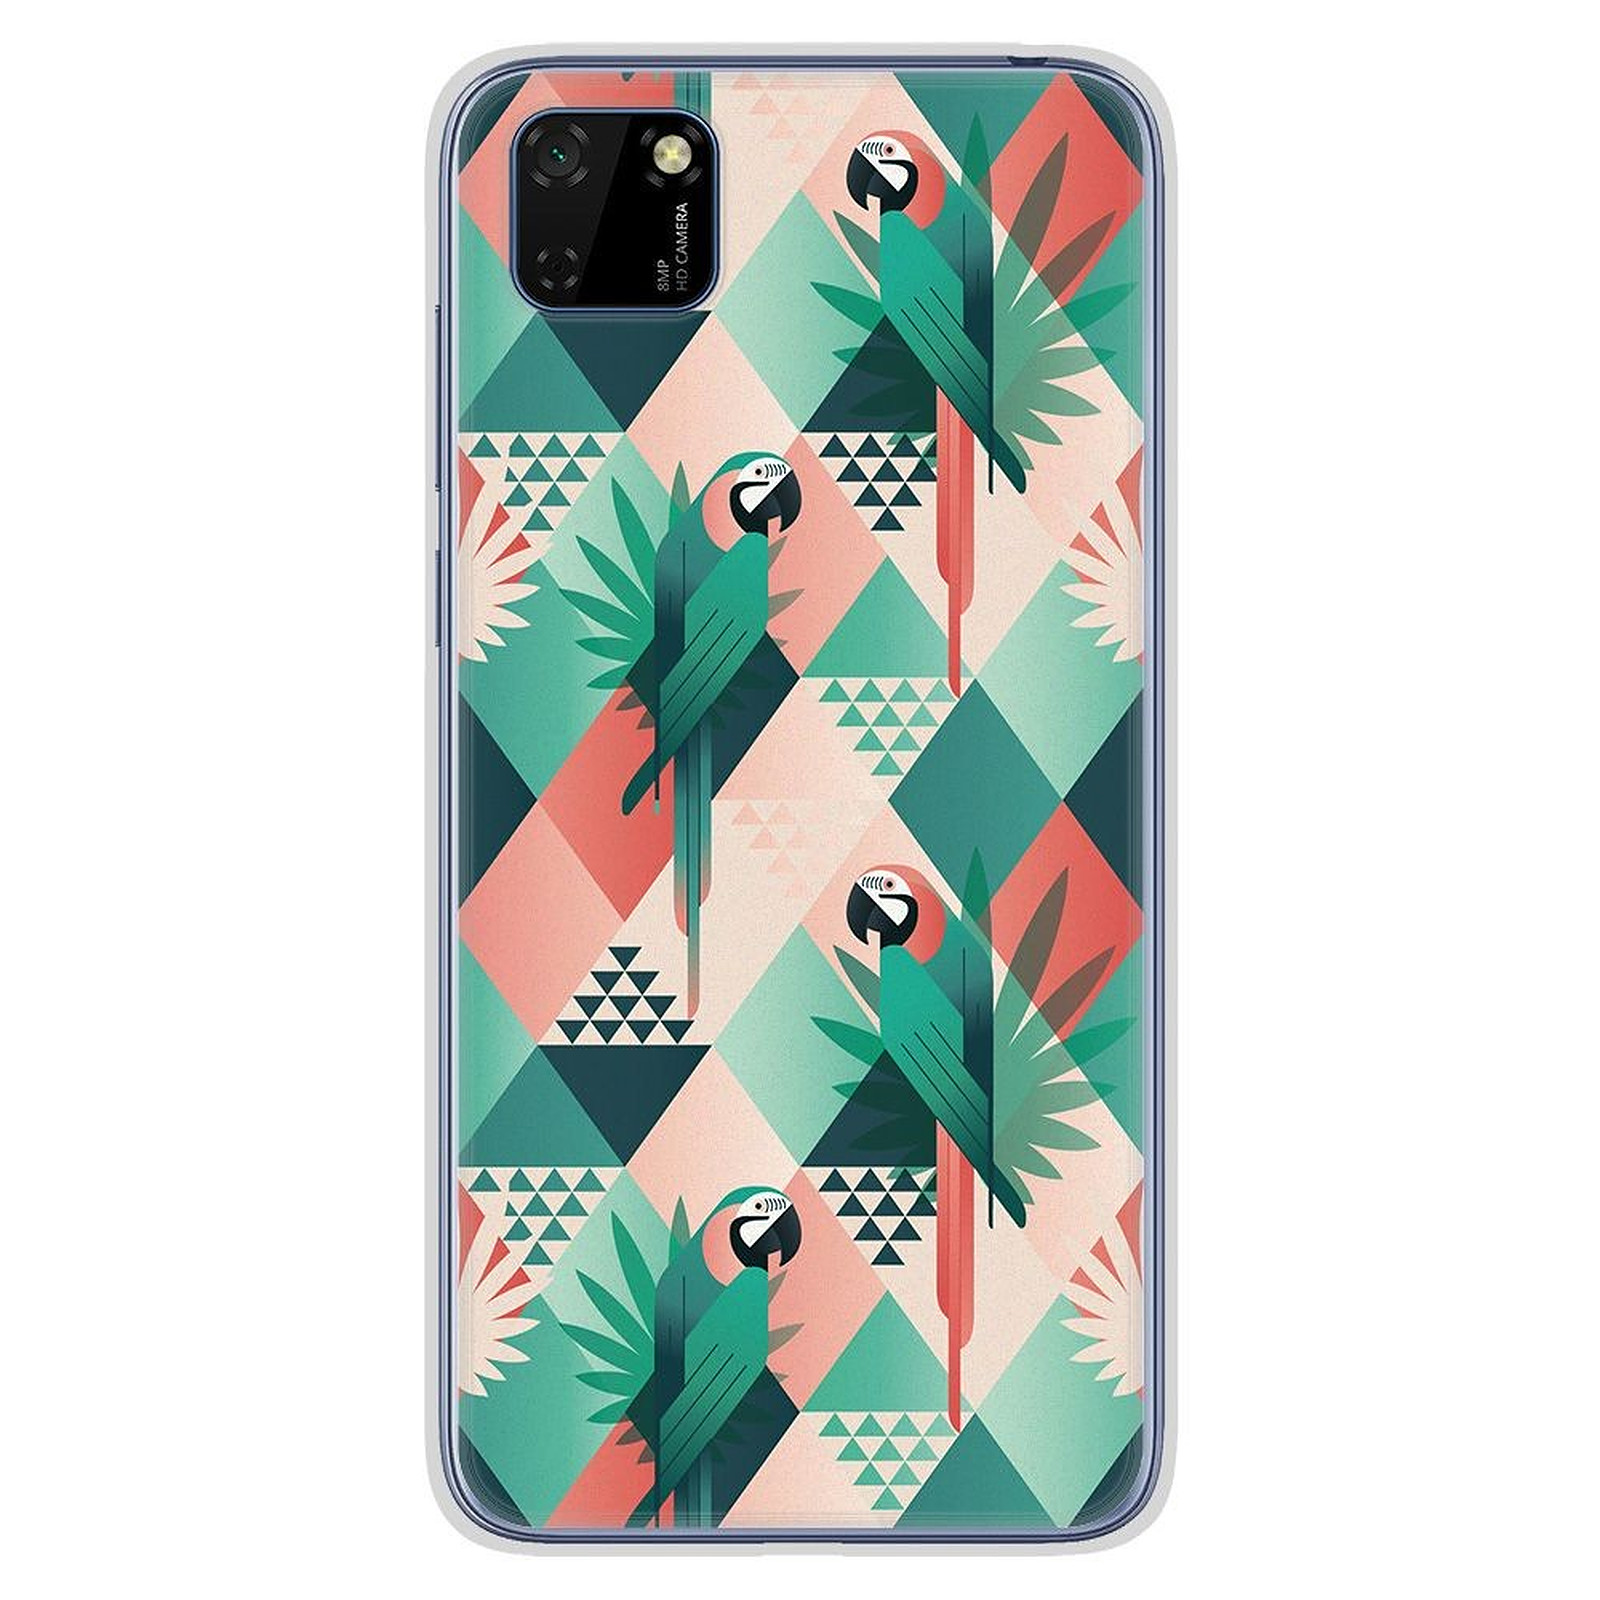 1001 Coques Coque silicone gel Huawei Y5P motif Perroquet ge´ome´trique - Coque telephone 1001Coques